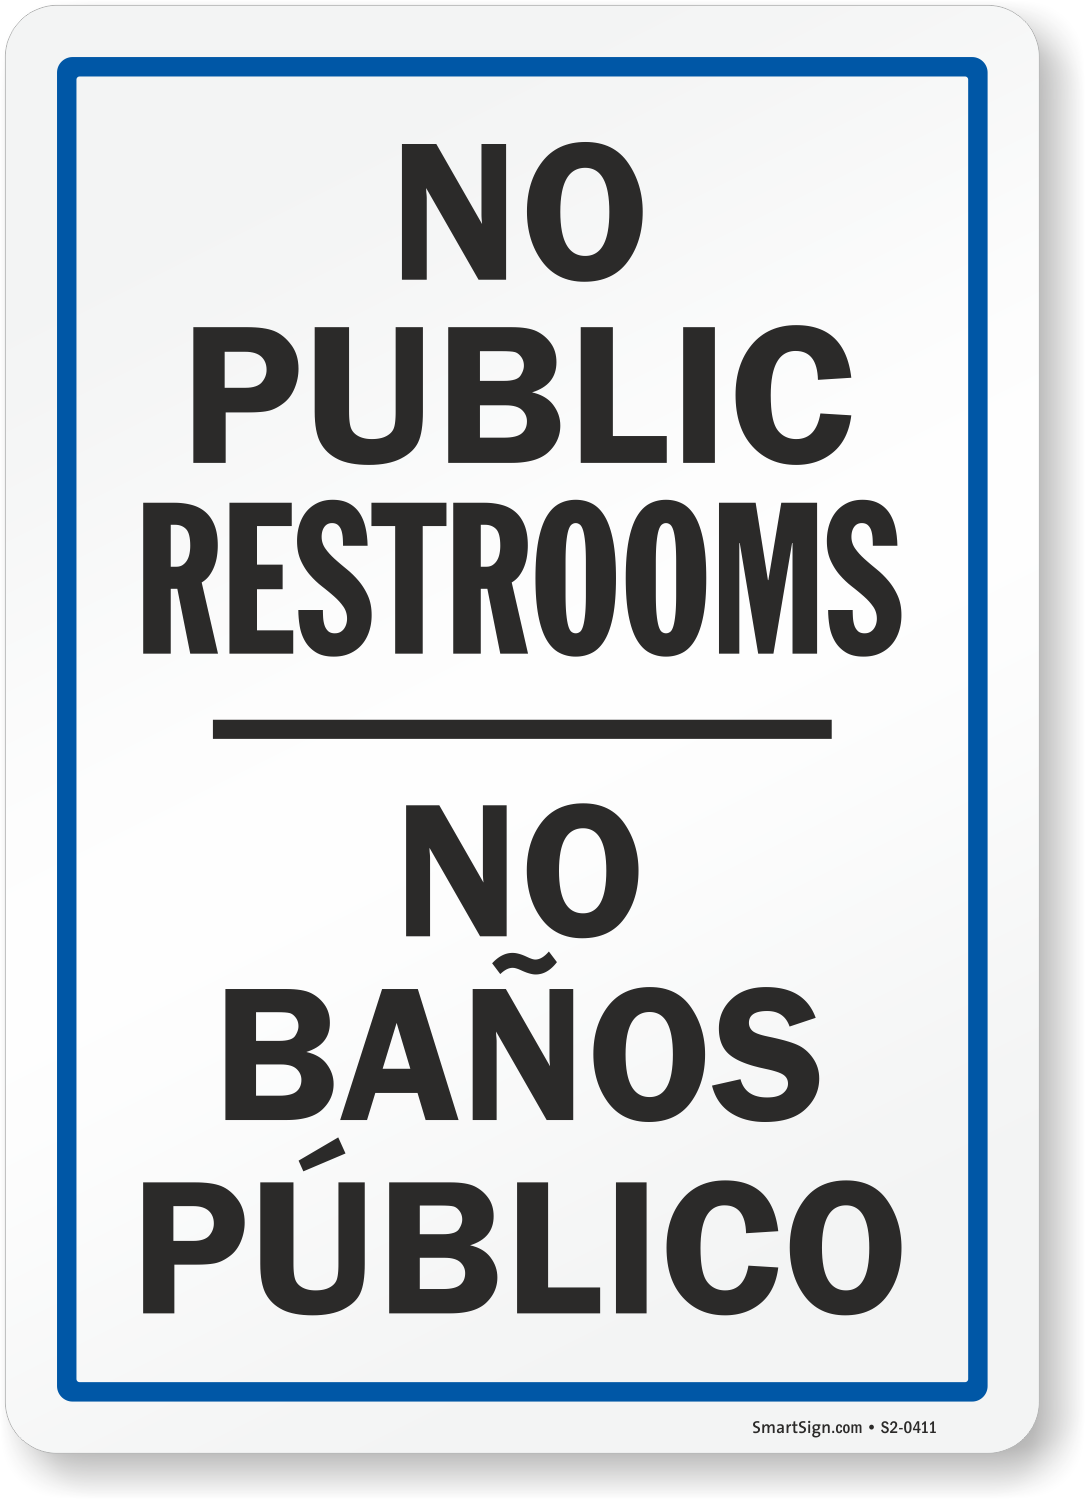 No Public Restroom Signs - Traditional and Anodized Aluminum.